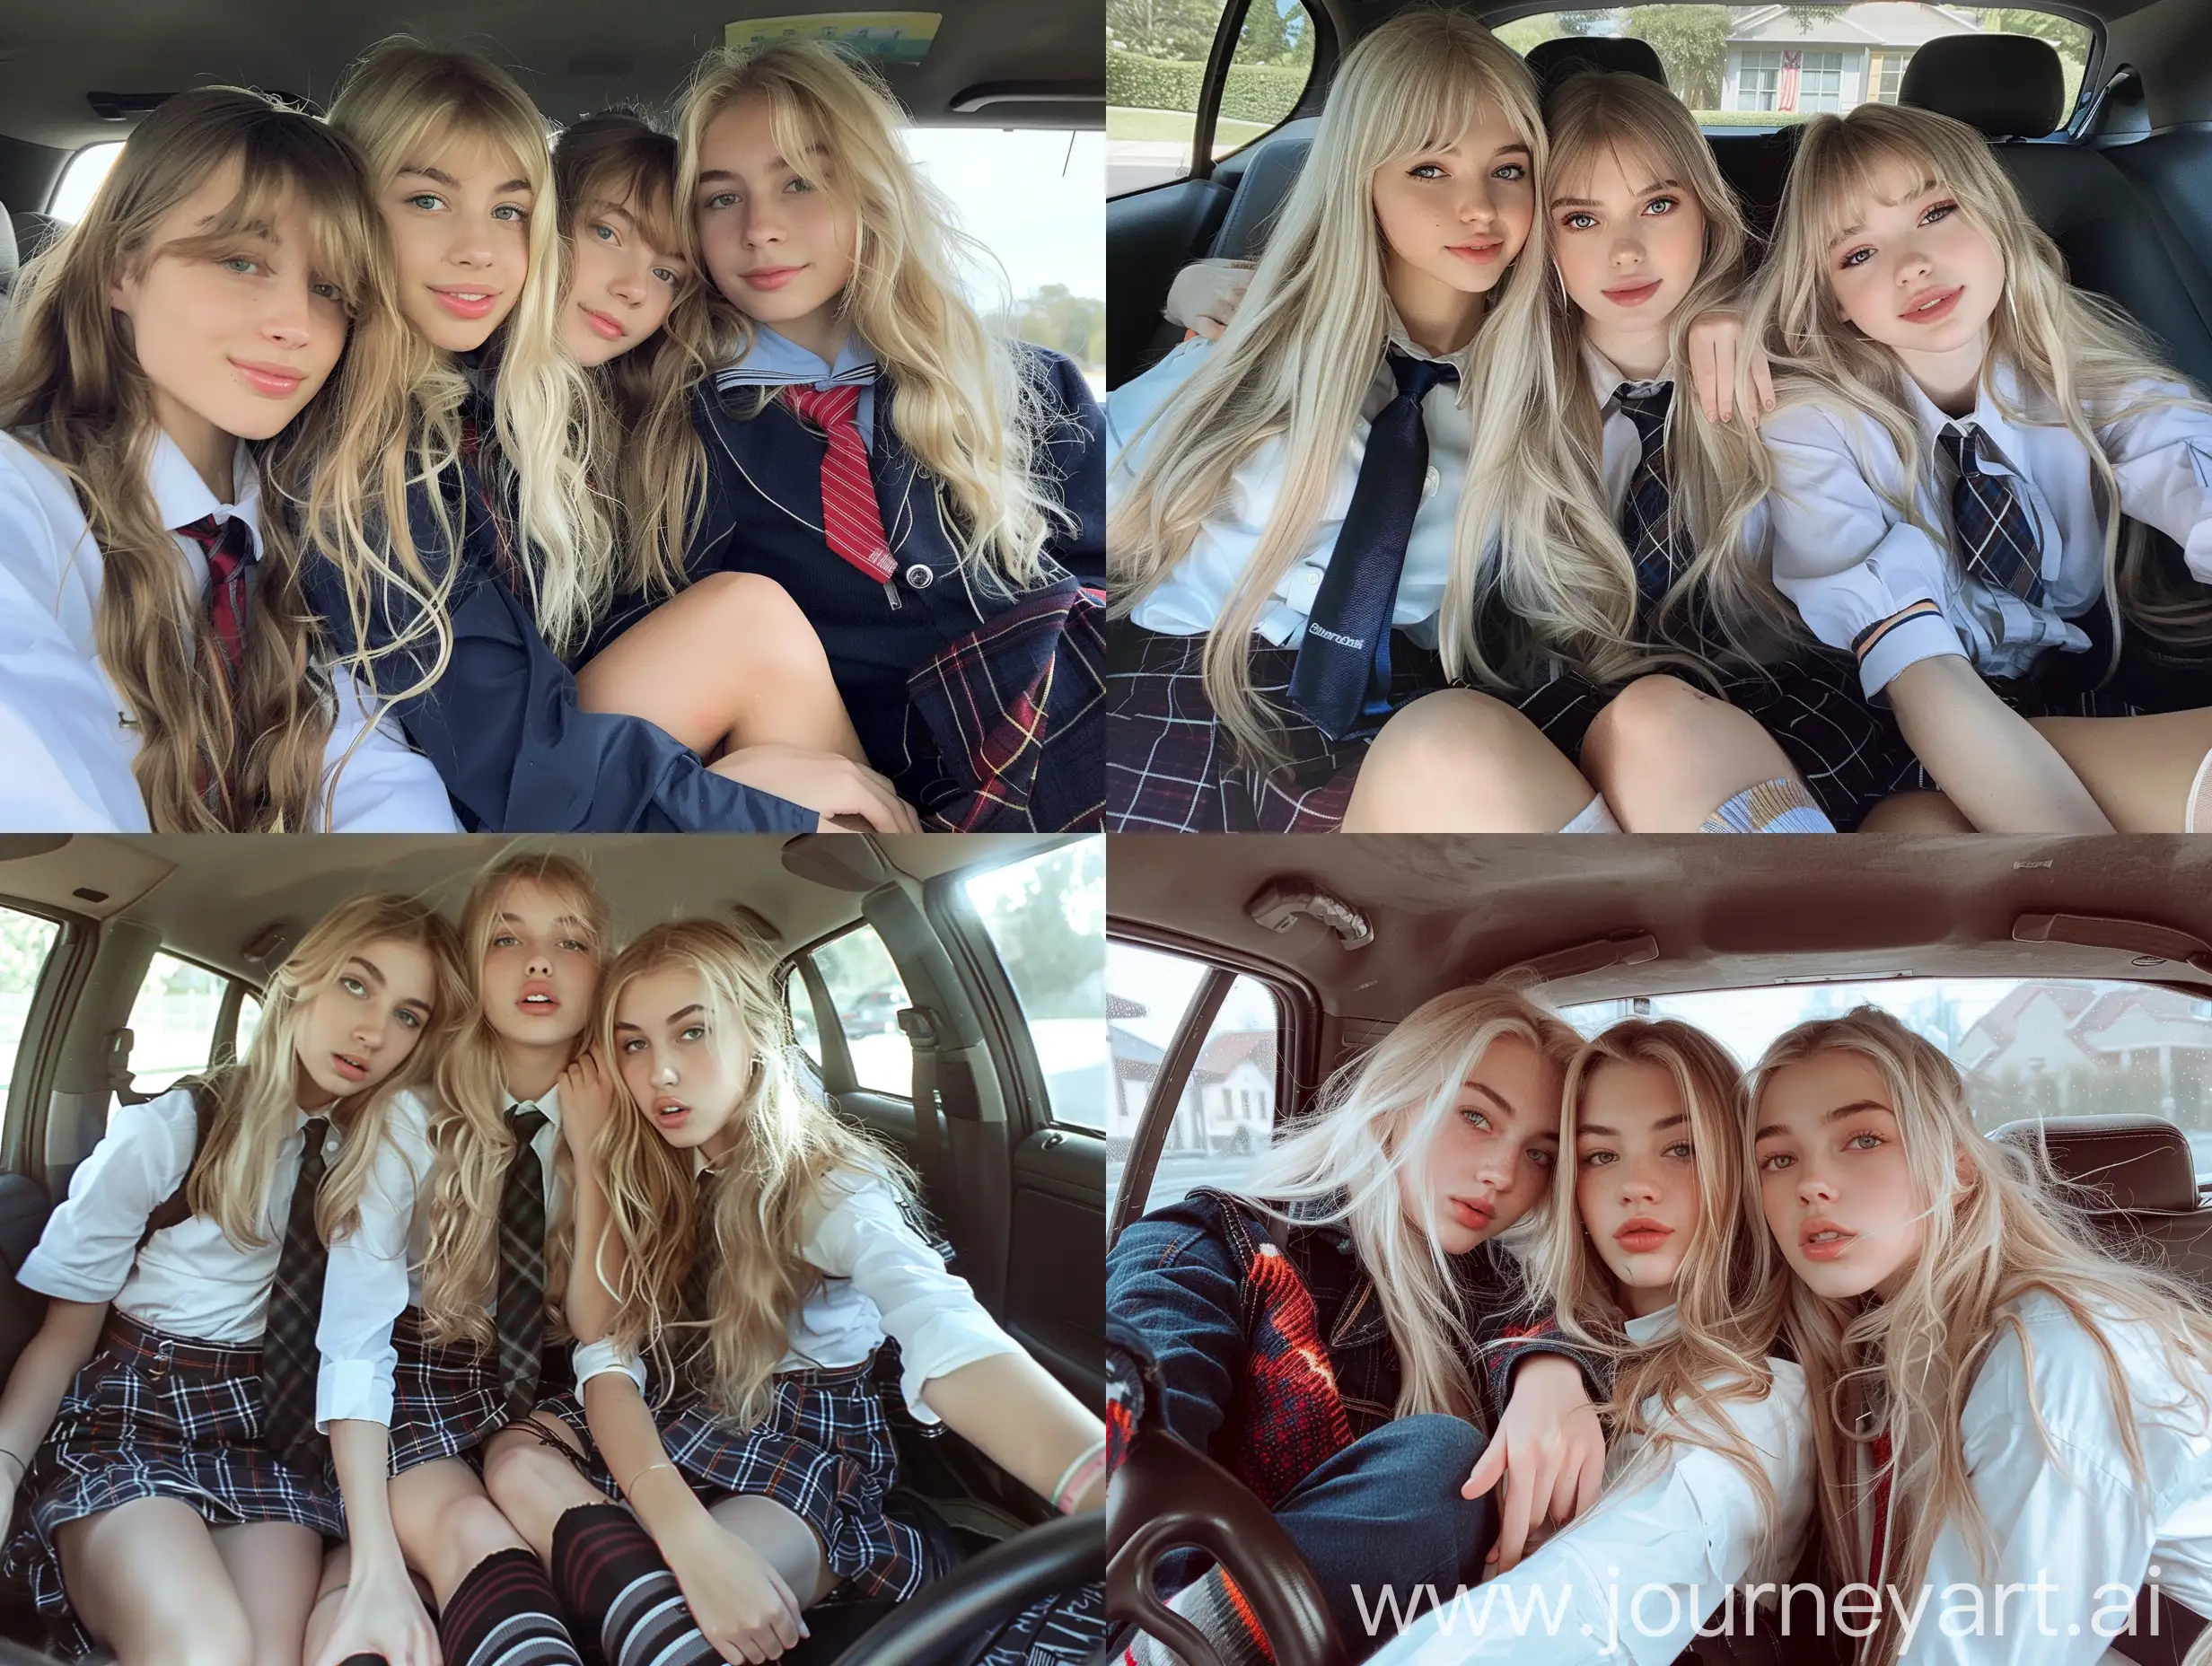 3 girls, long blond hair , 22 years old, inside car, influencer, beauty ,, school uniform, makeup,, sitting on car , socks and boots, no effect, selfie , iphone selfie, no filters , iphone photo natural